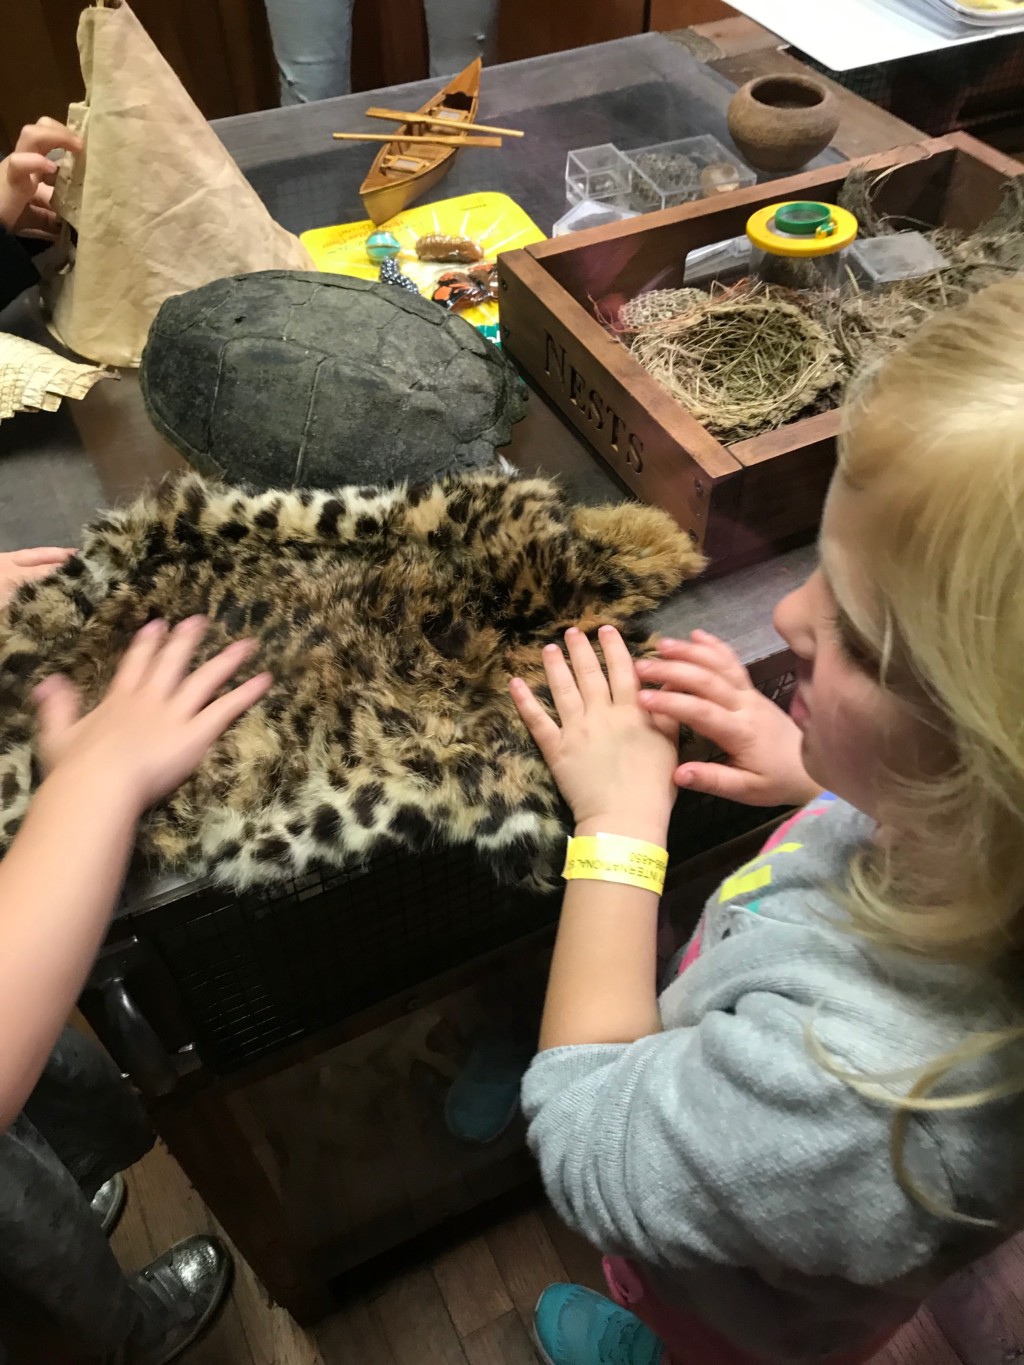 Two children touching a spotted pelt at a table with various natural objects. 